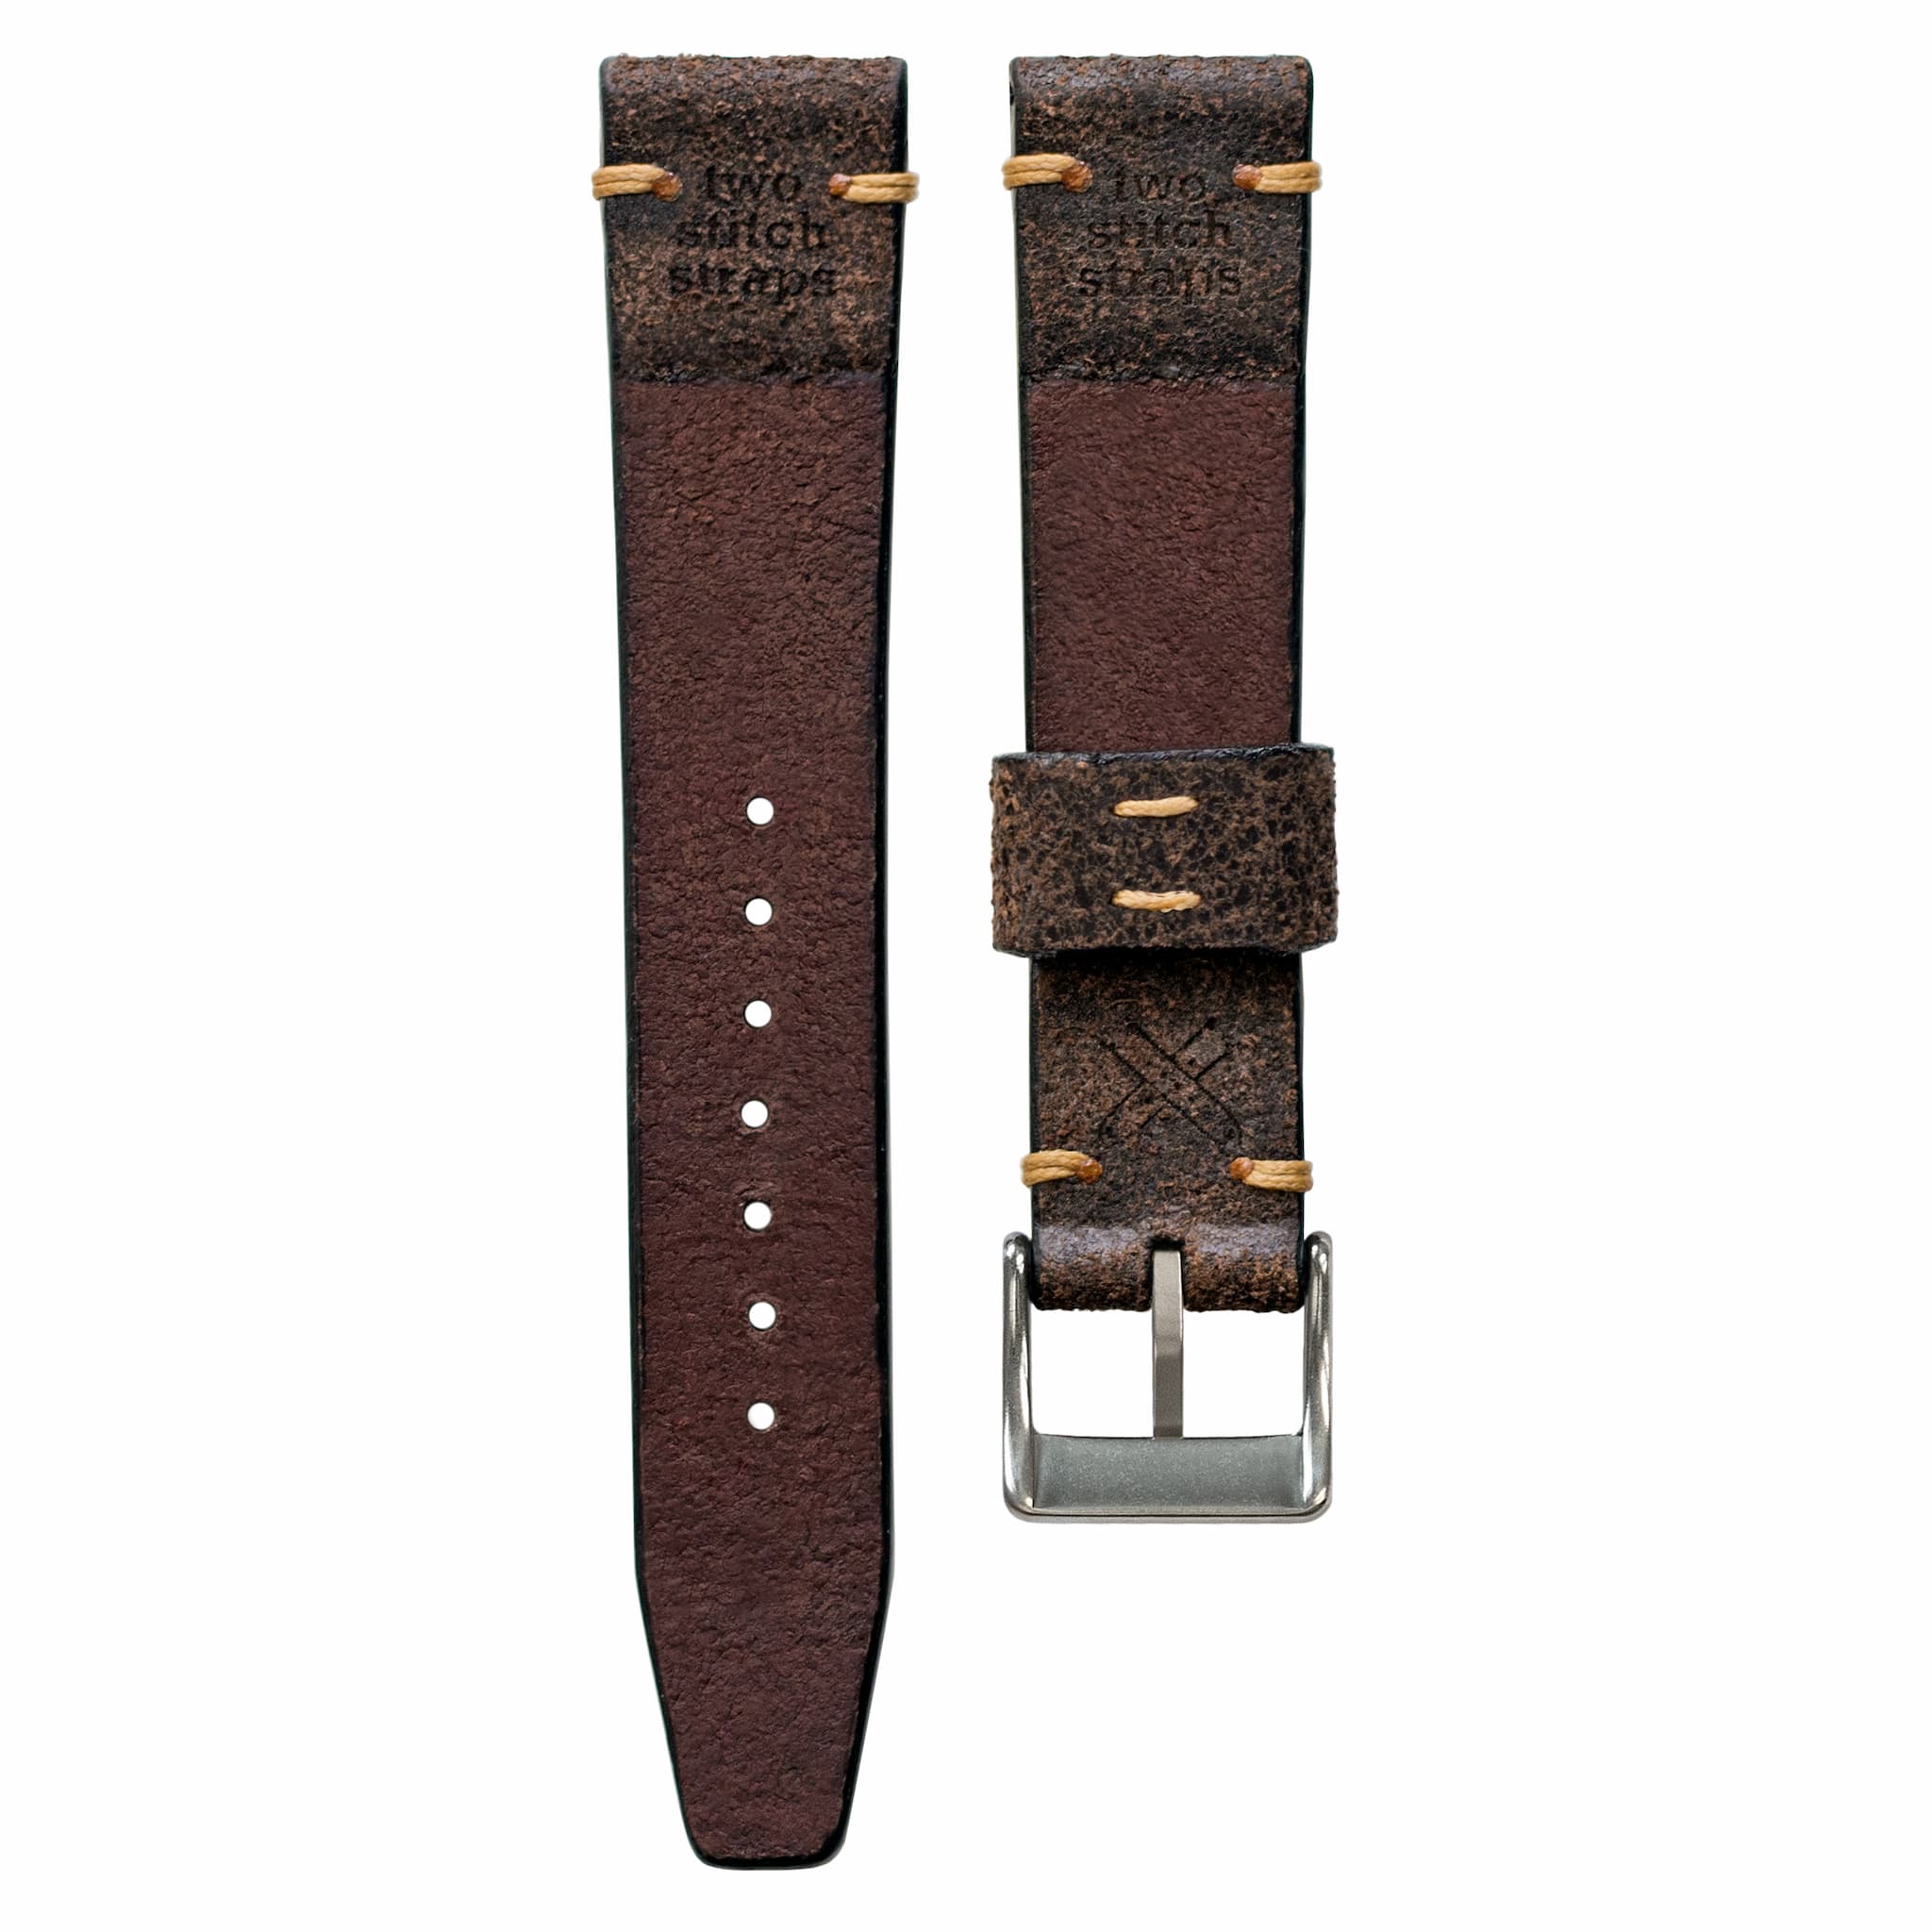 HIGH QUALITY BUG LEATHER TIE-DOWN STRAPS FOR THAT CLASSIC VINTAGE LOOK.  (SET OF 2)